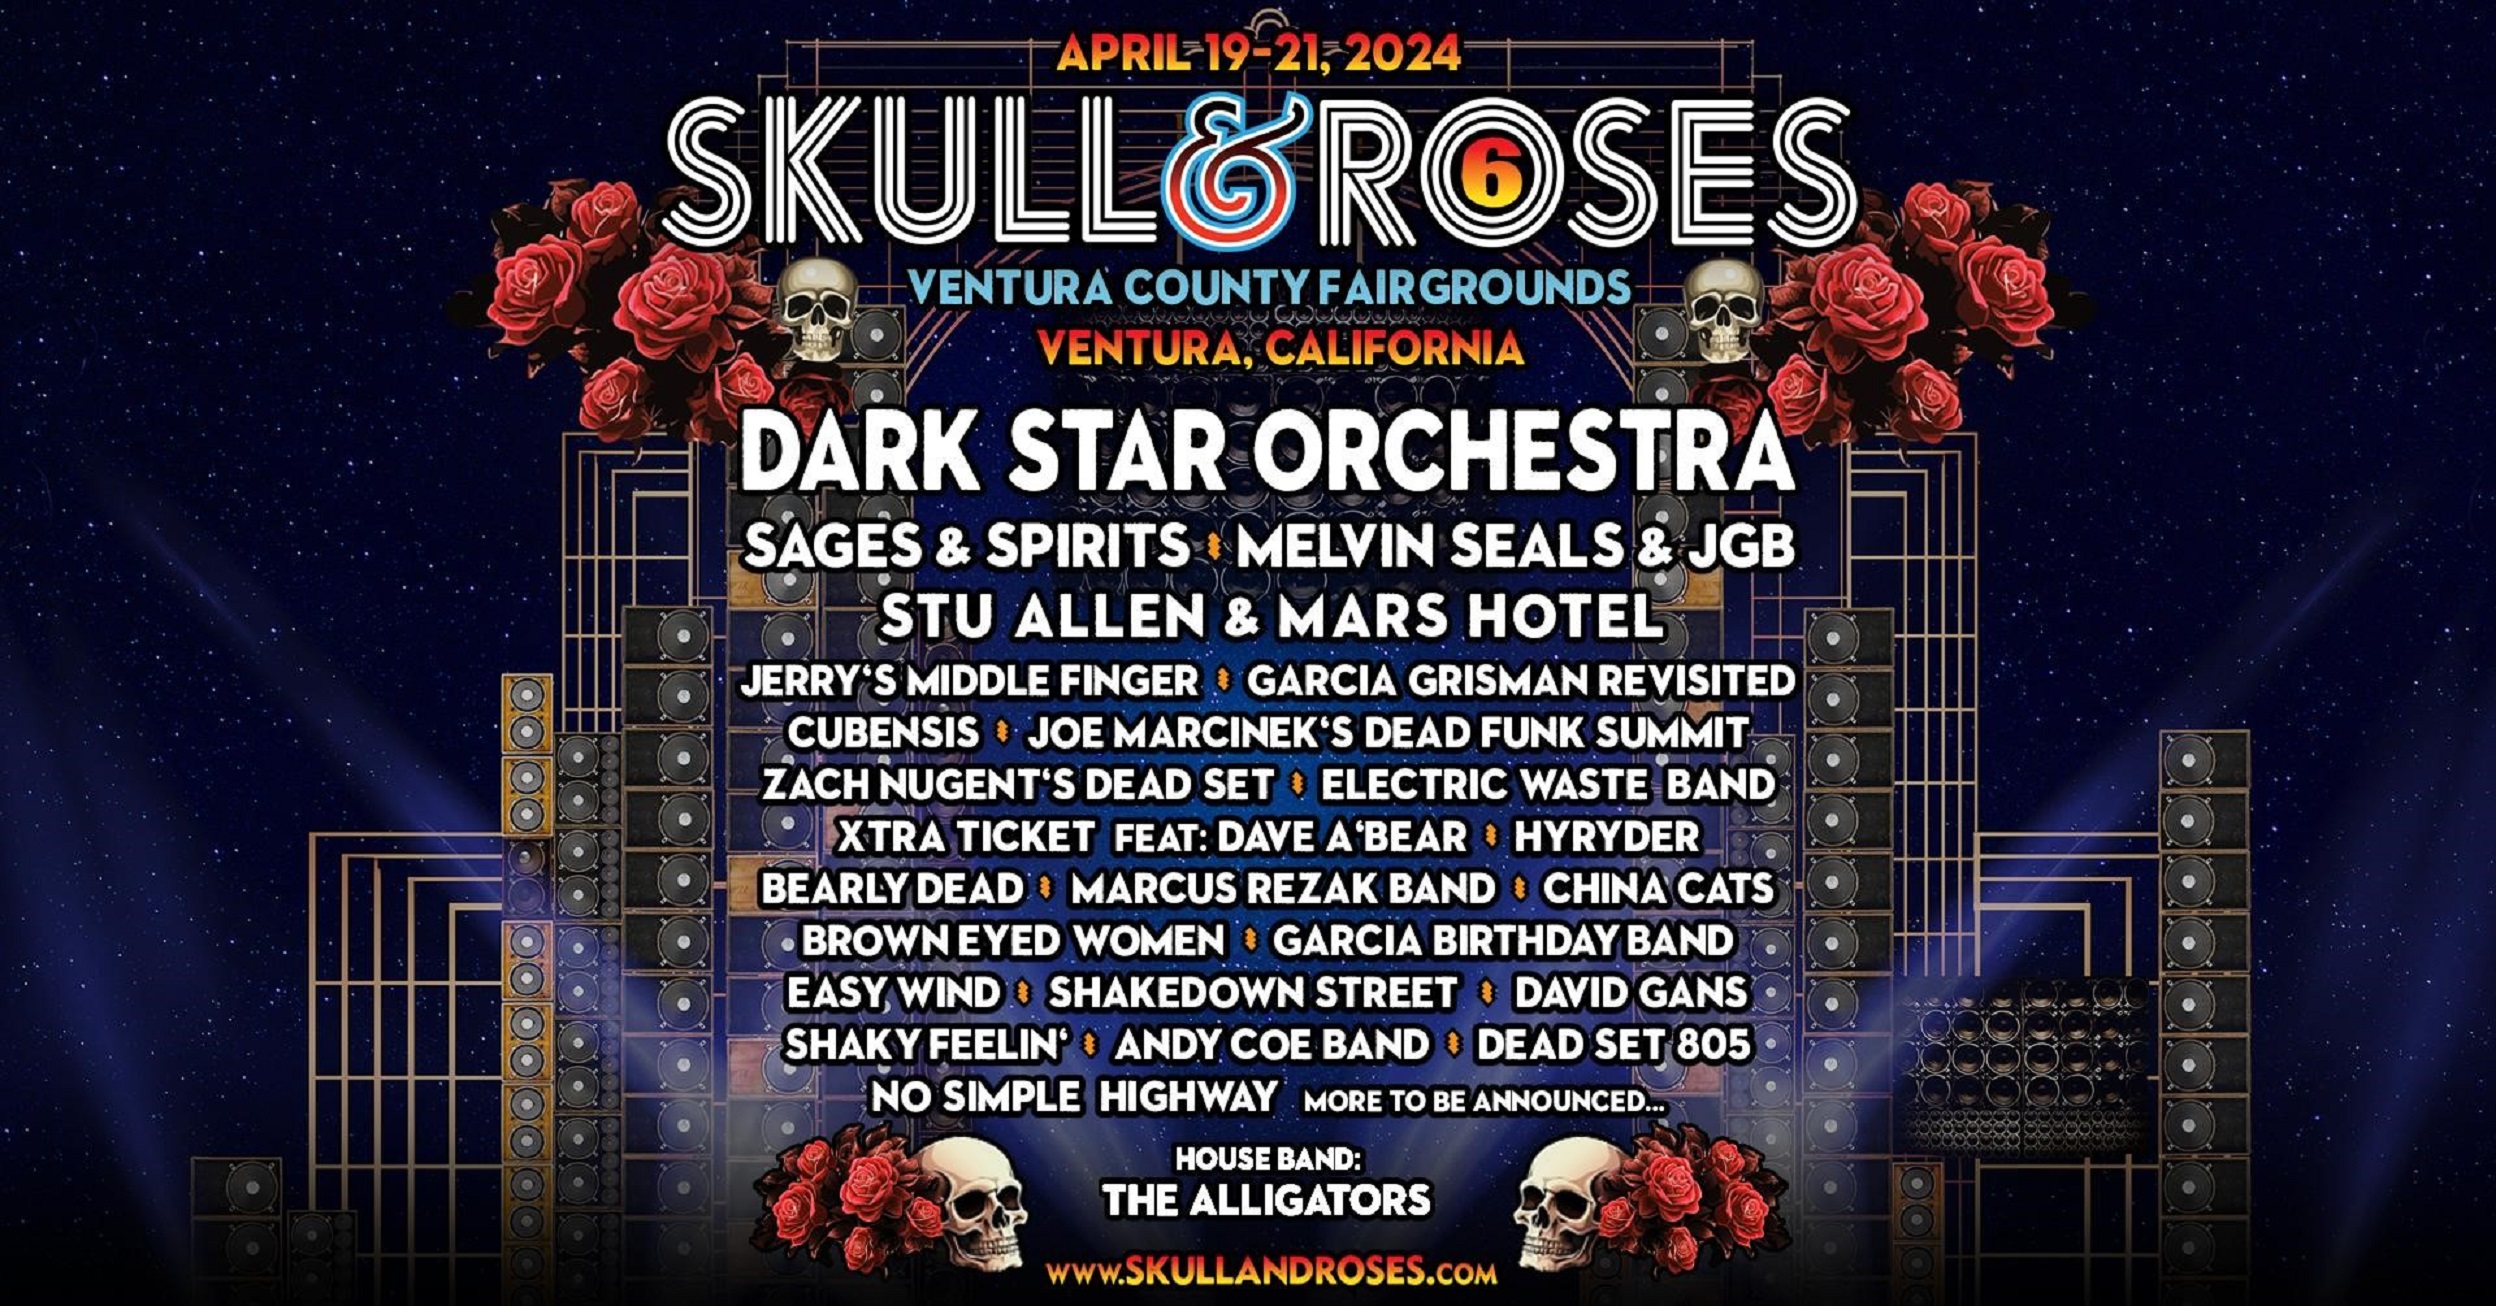 SKULL & ROSES Takes You "To The Promised Land" This April